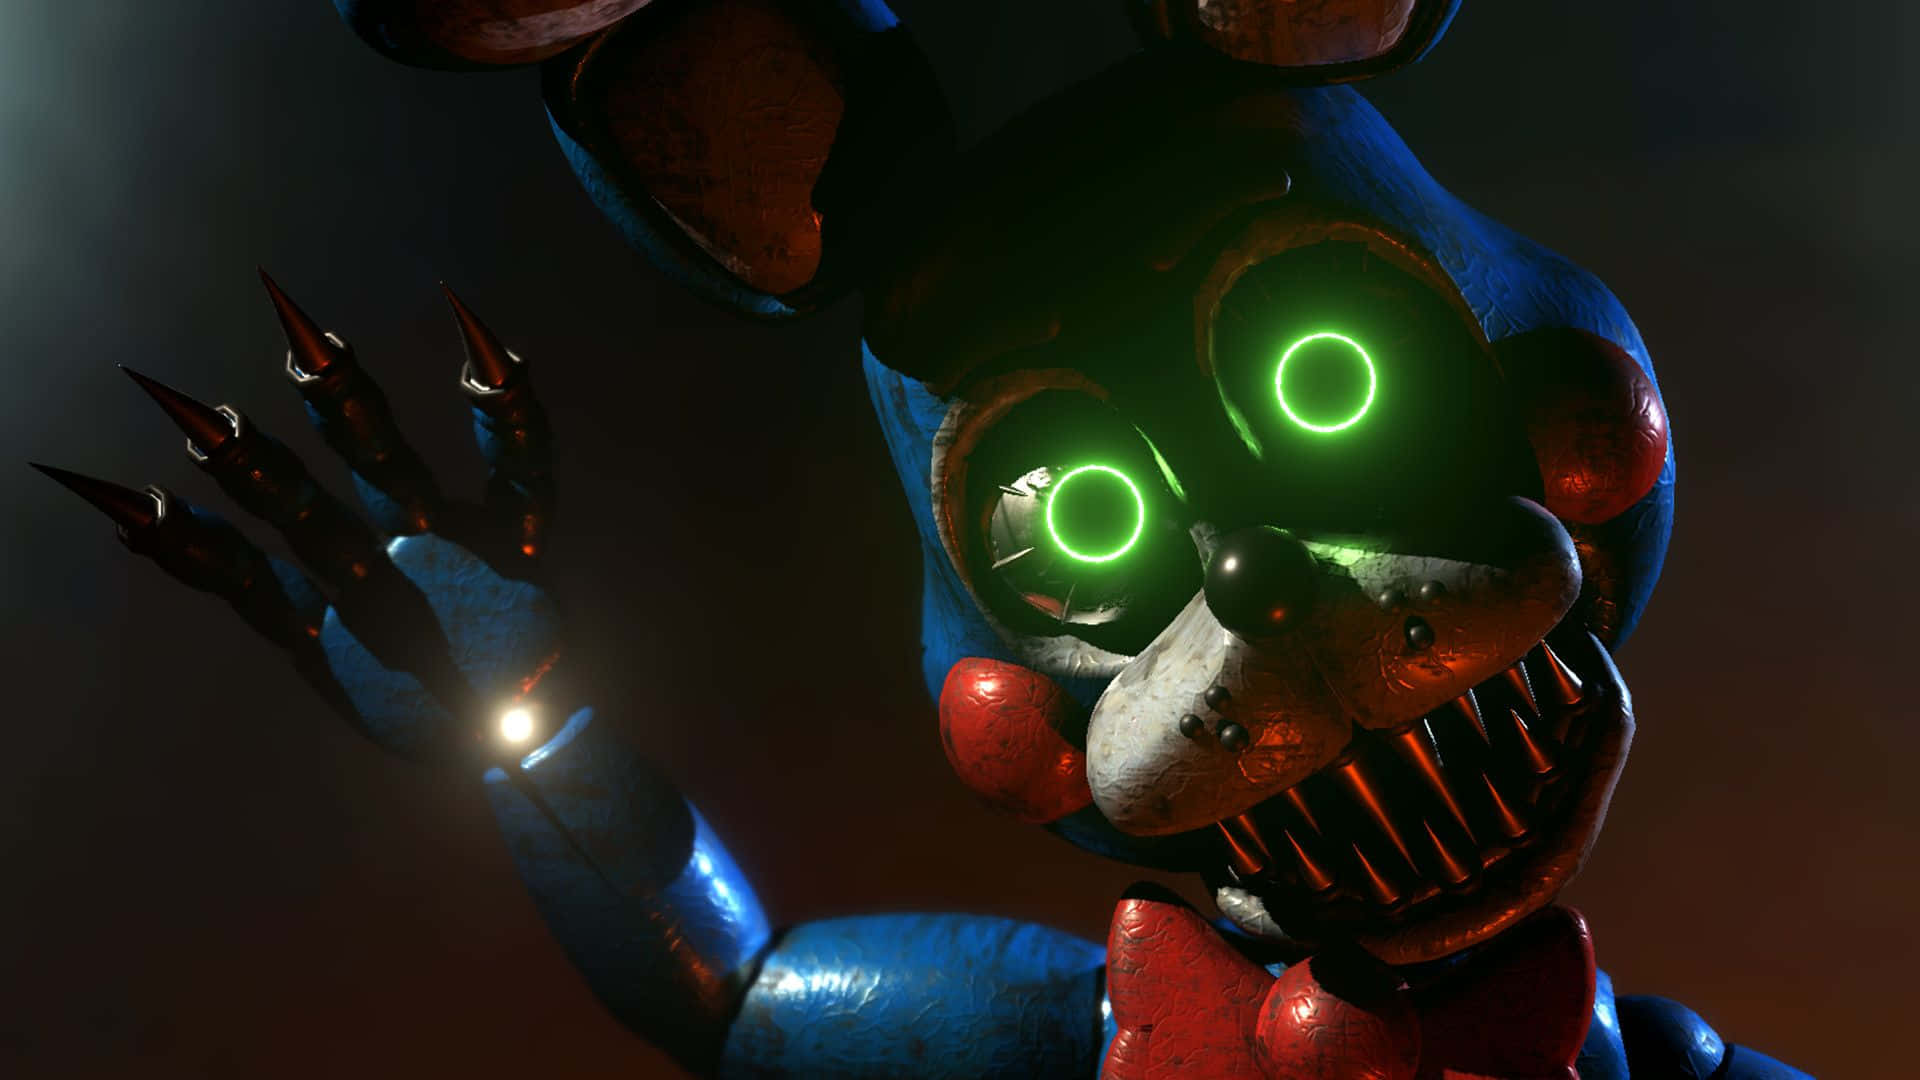 Download Intense Encounter With Nightmare Animatronics In Fnaf